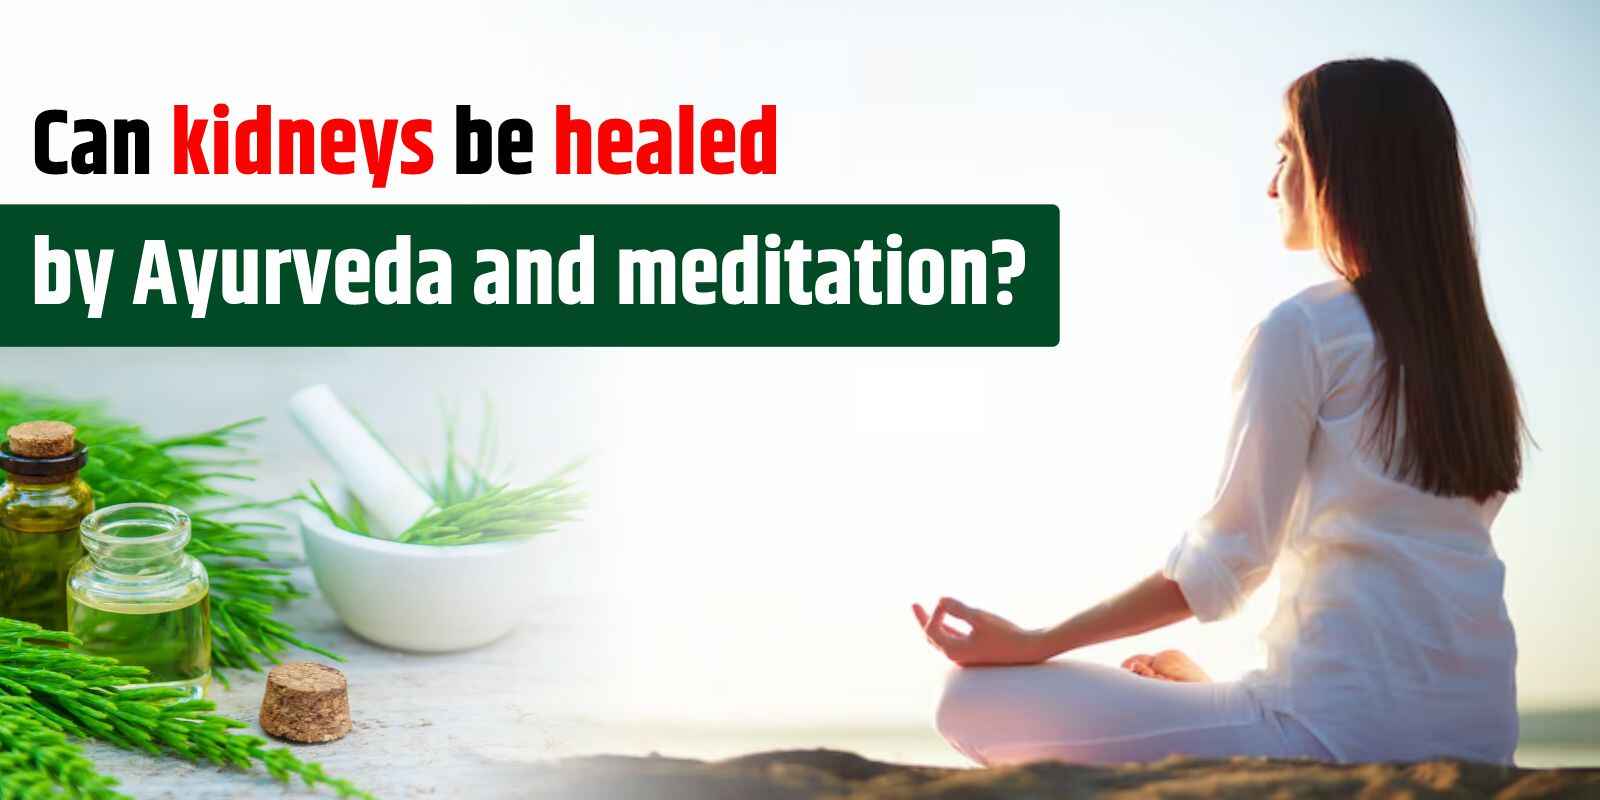 Can kidneys be healed by Ayurveda and meditation?